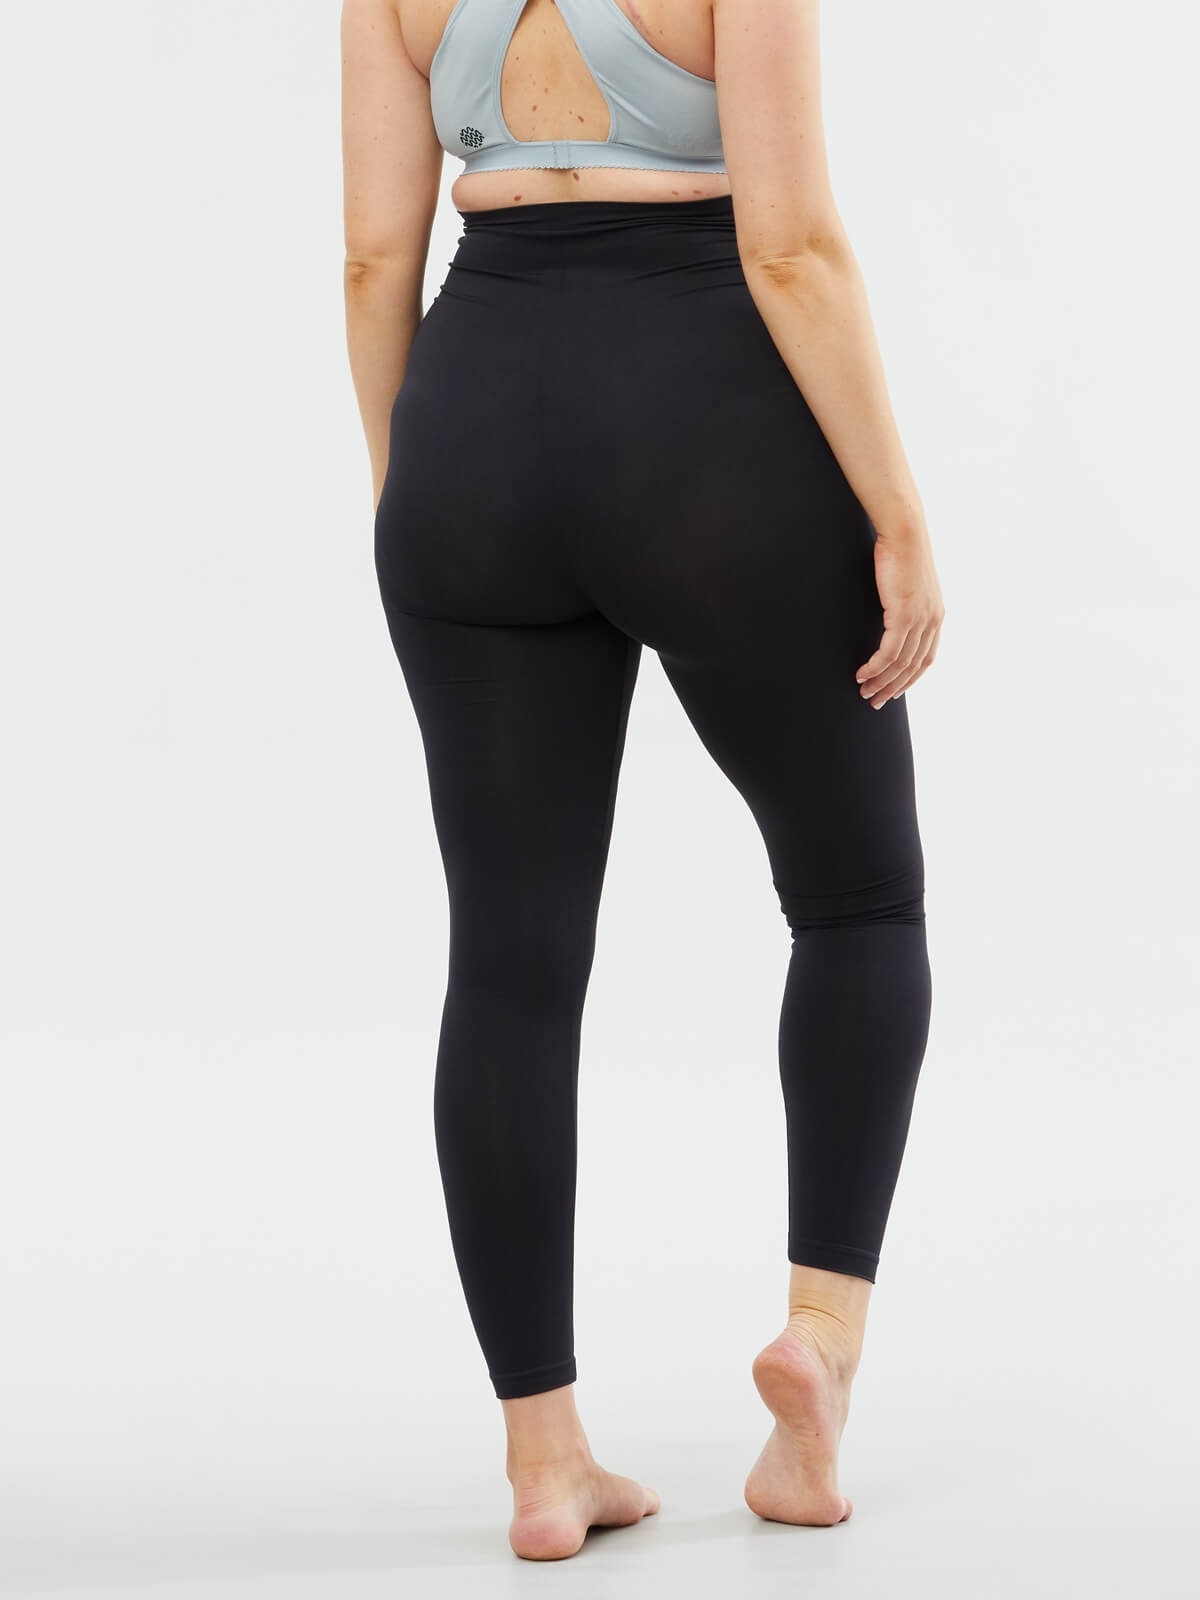 Maacie Maternity Yoga Pants 2.0 Seamless Buttery High Wasit Legging  Upgraded Version